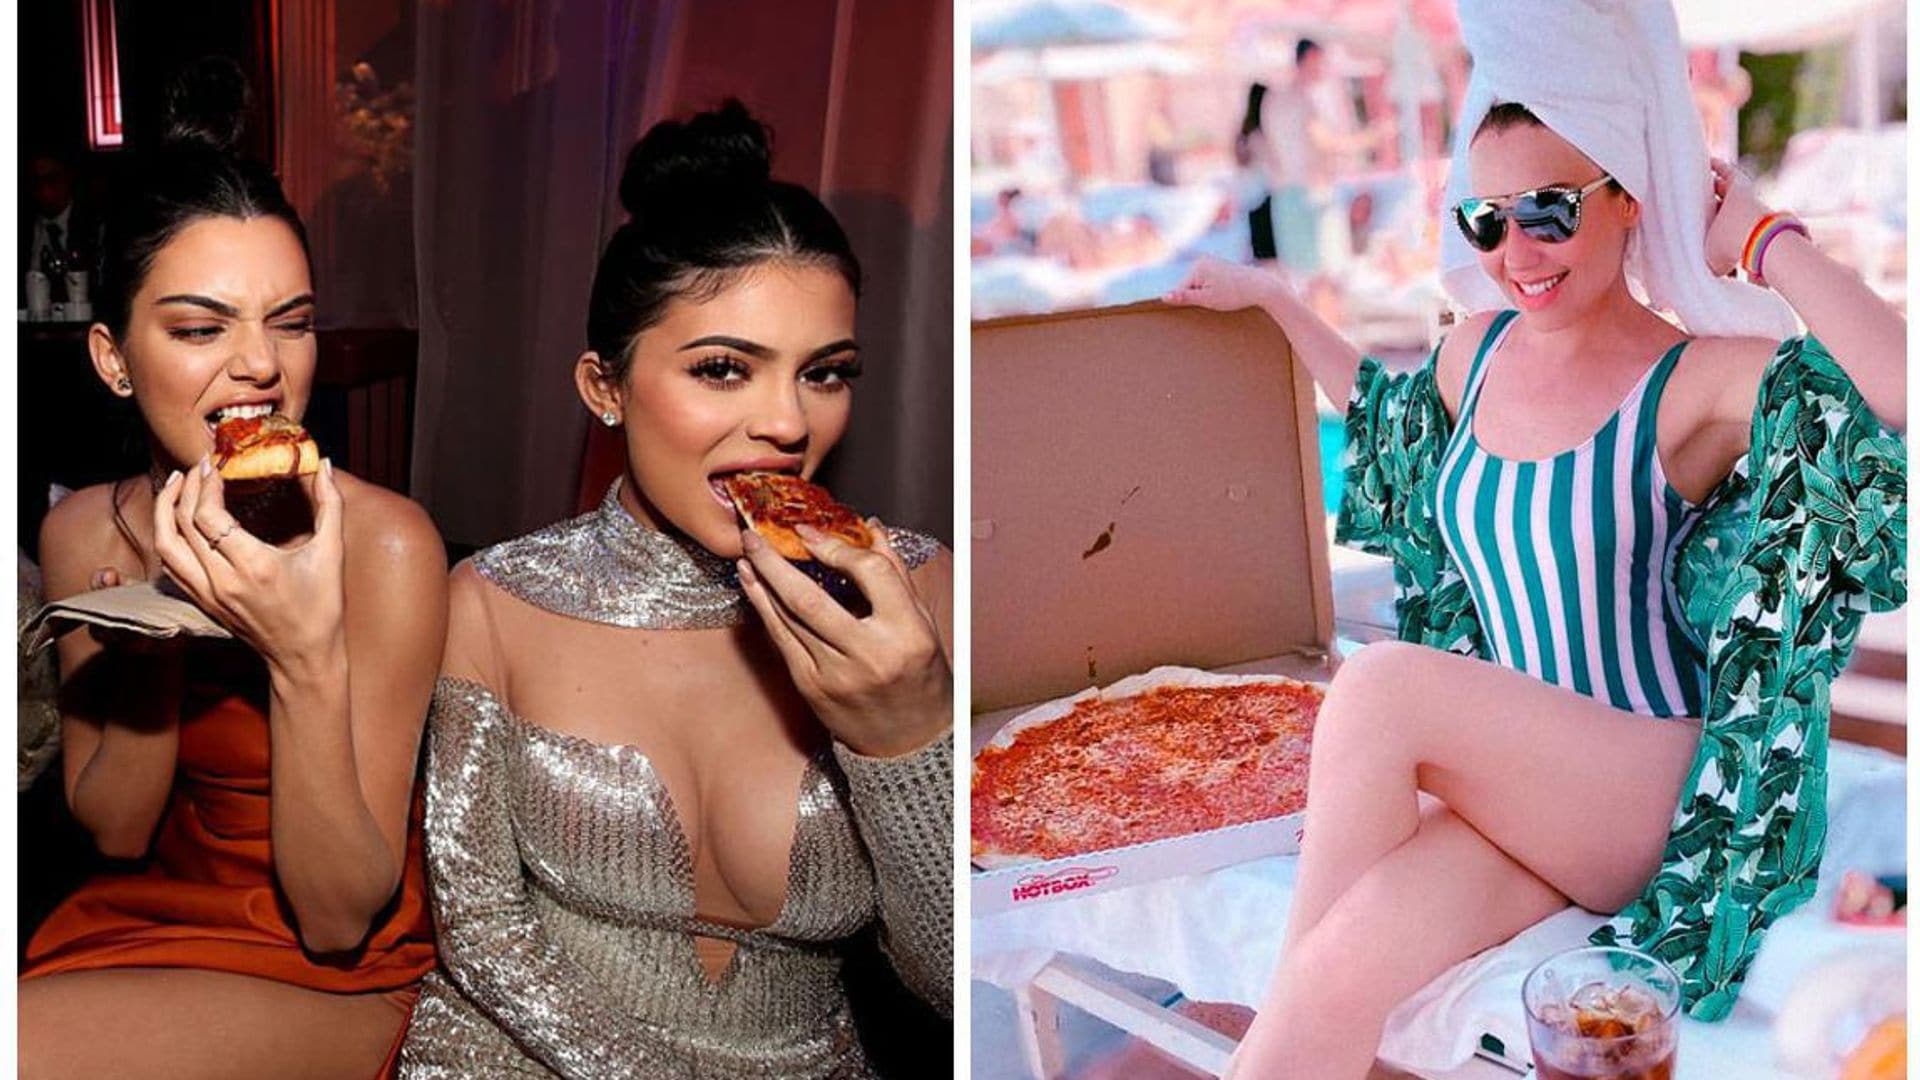 From the Kardashians to Madonna: all the celebrities who can’t resist a slice of pizza